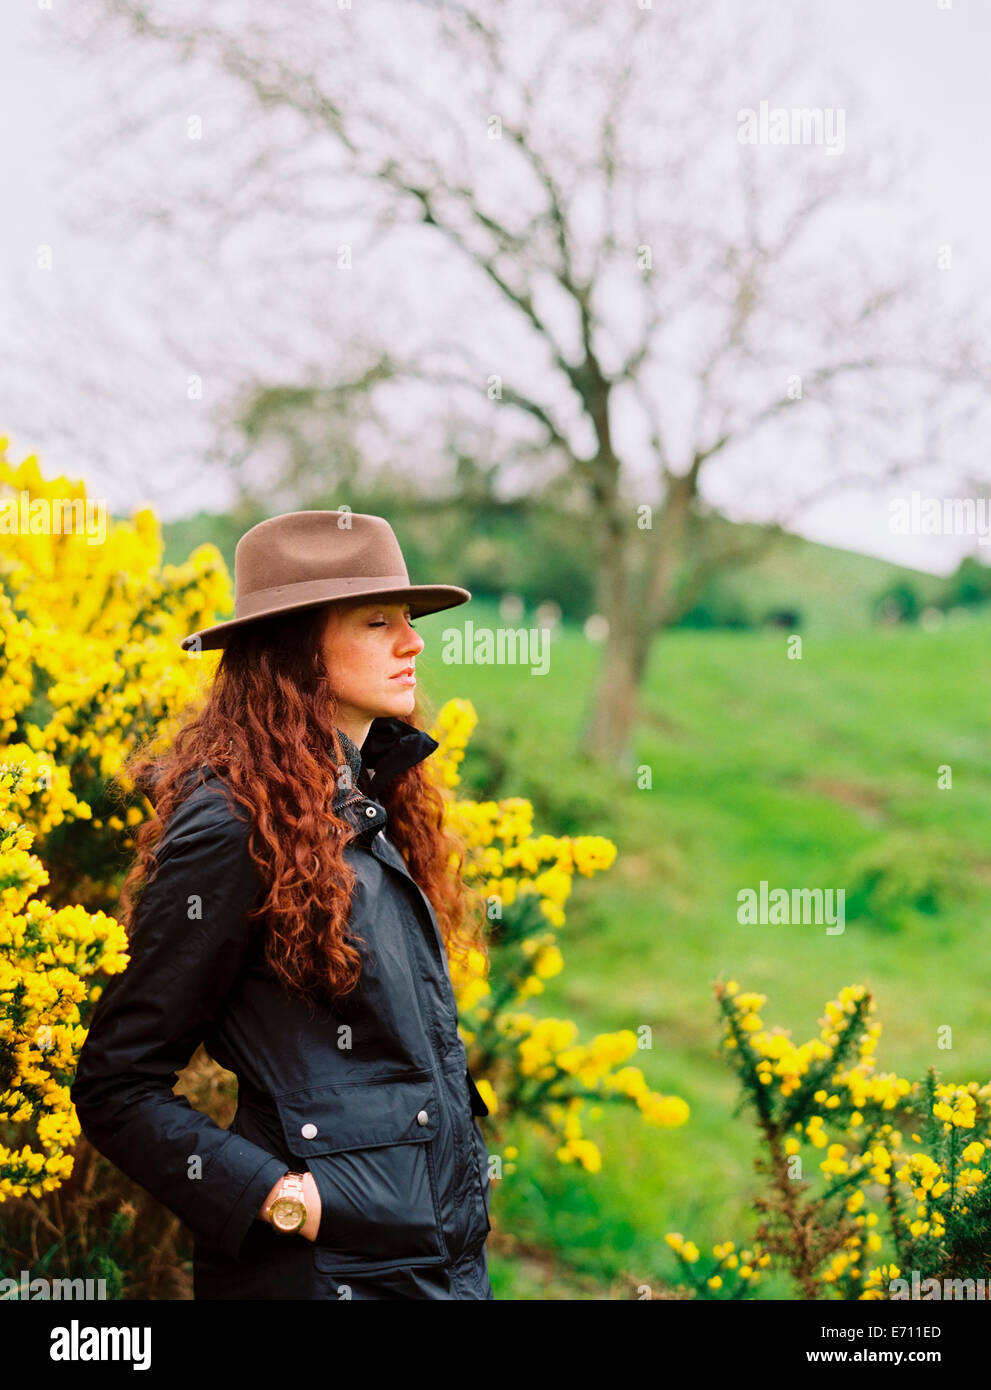 A woman with long curly hair wearing a hat, by a flowering gorse bush. Stock Photo